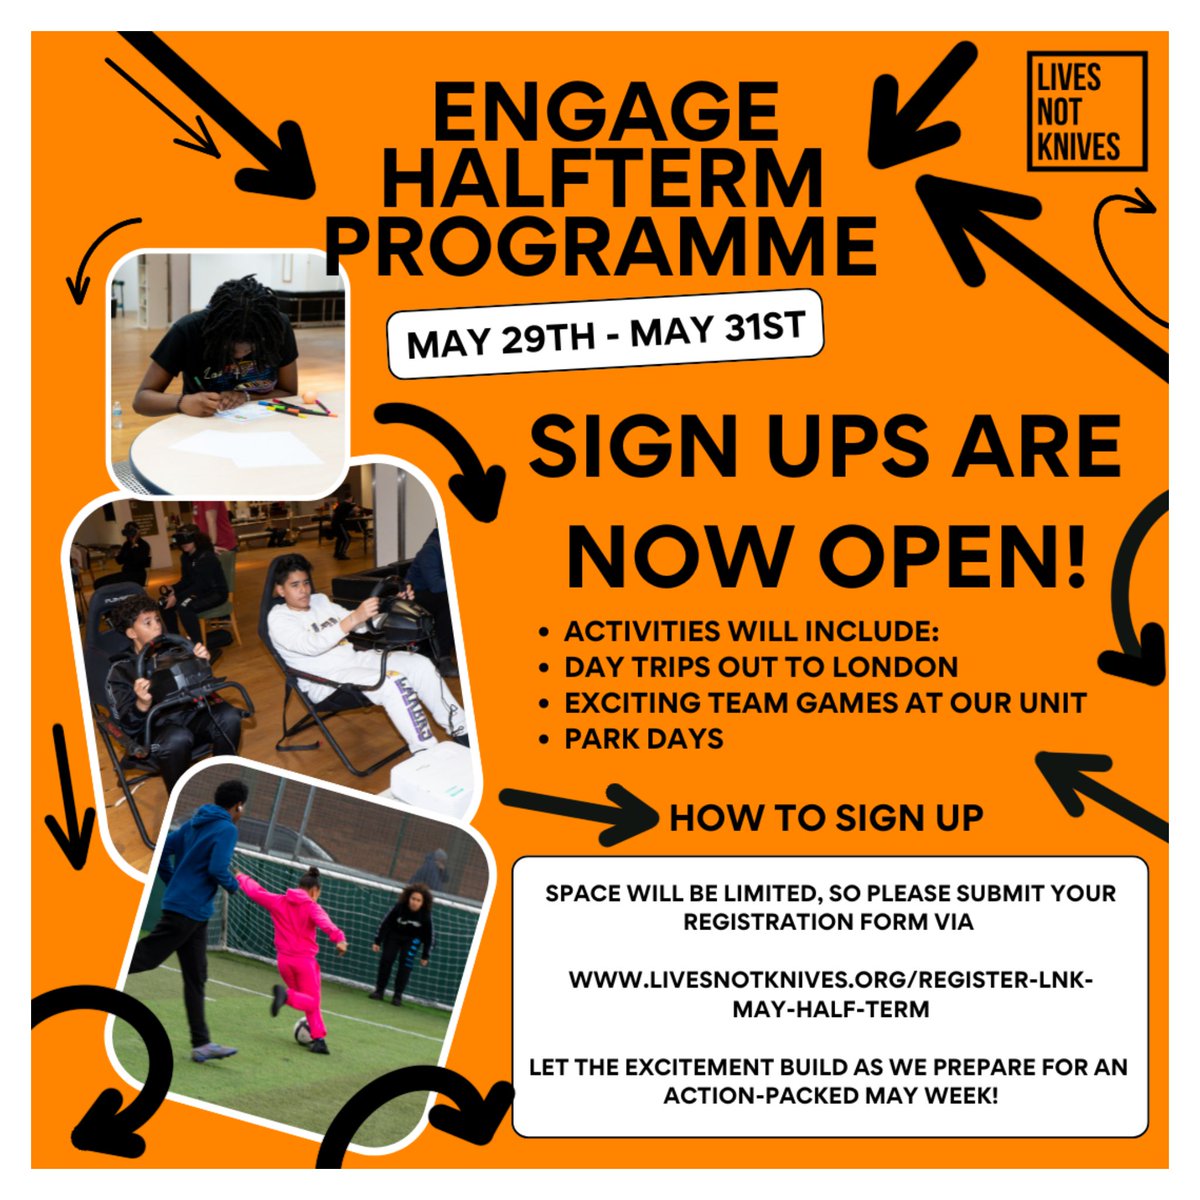 We are delighted to announce the return of our LNK Engage programme this May half-term, 29.5.24 - 31.5.24! 🌟 Like our summer session, we have 20 spots available on a first-come, first-served basis. Sign up now at buff.ly/2Pblo6E